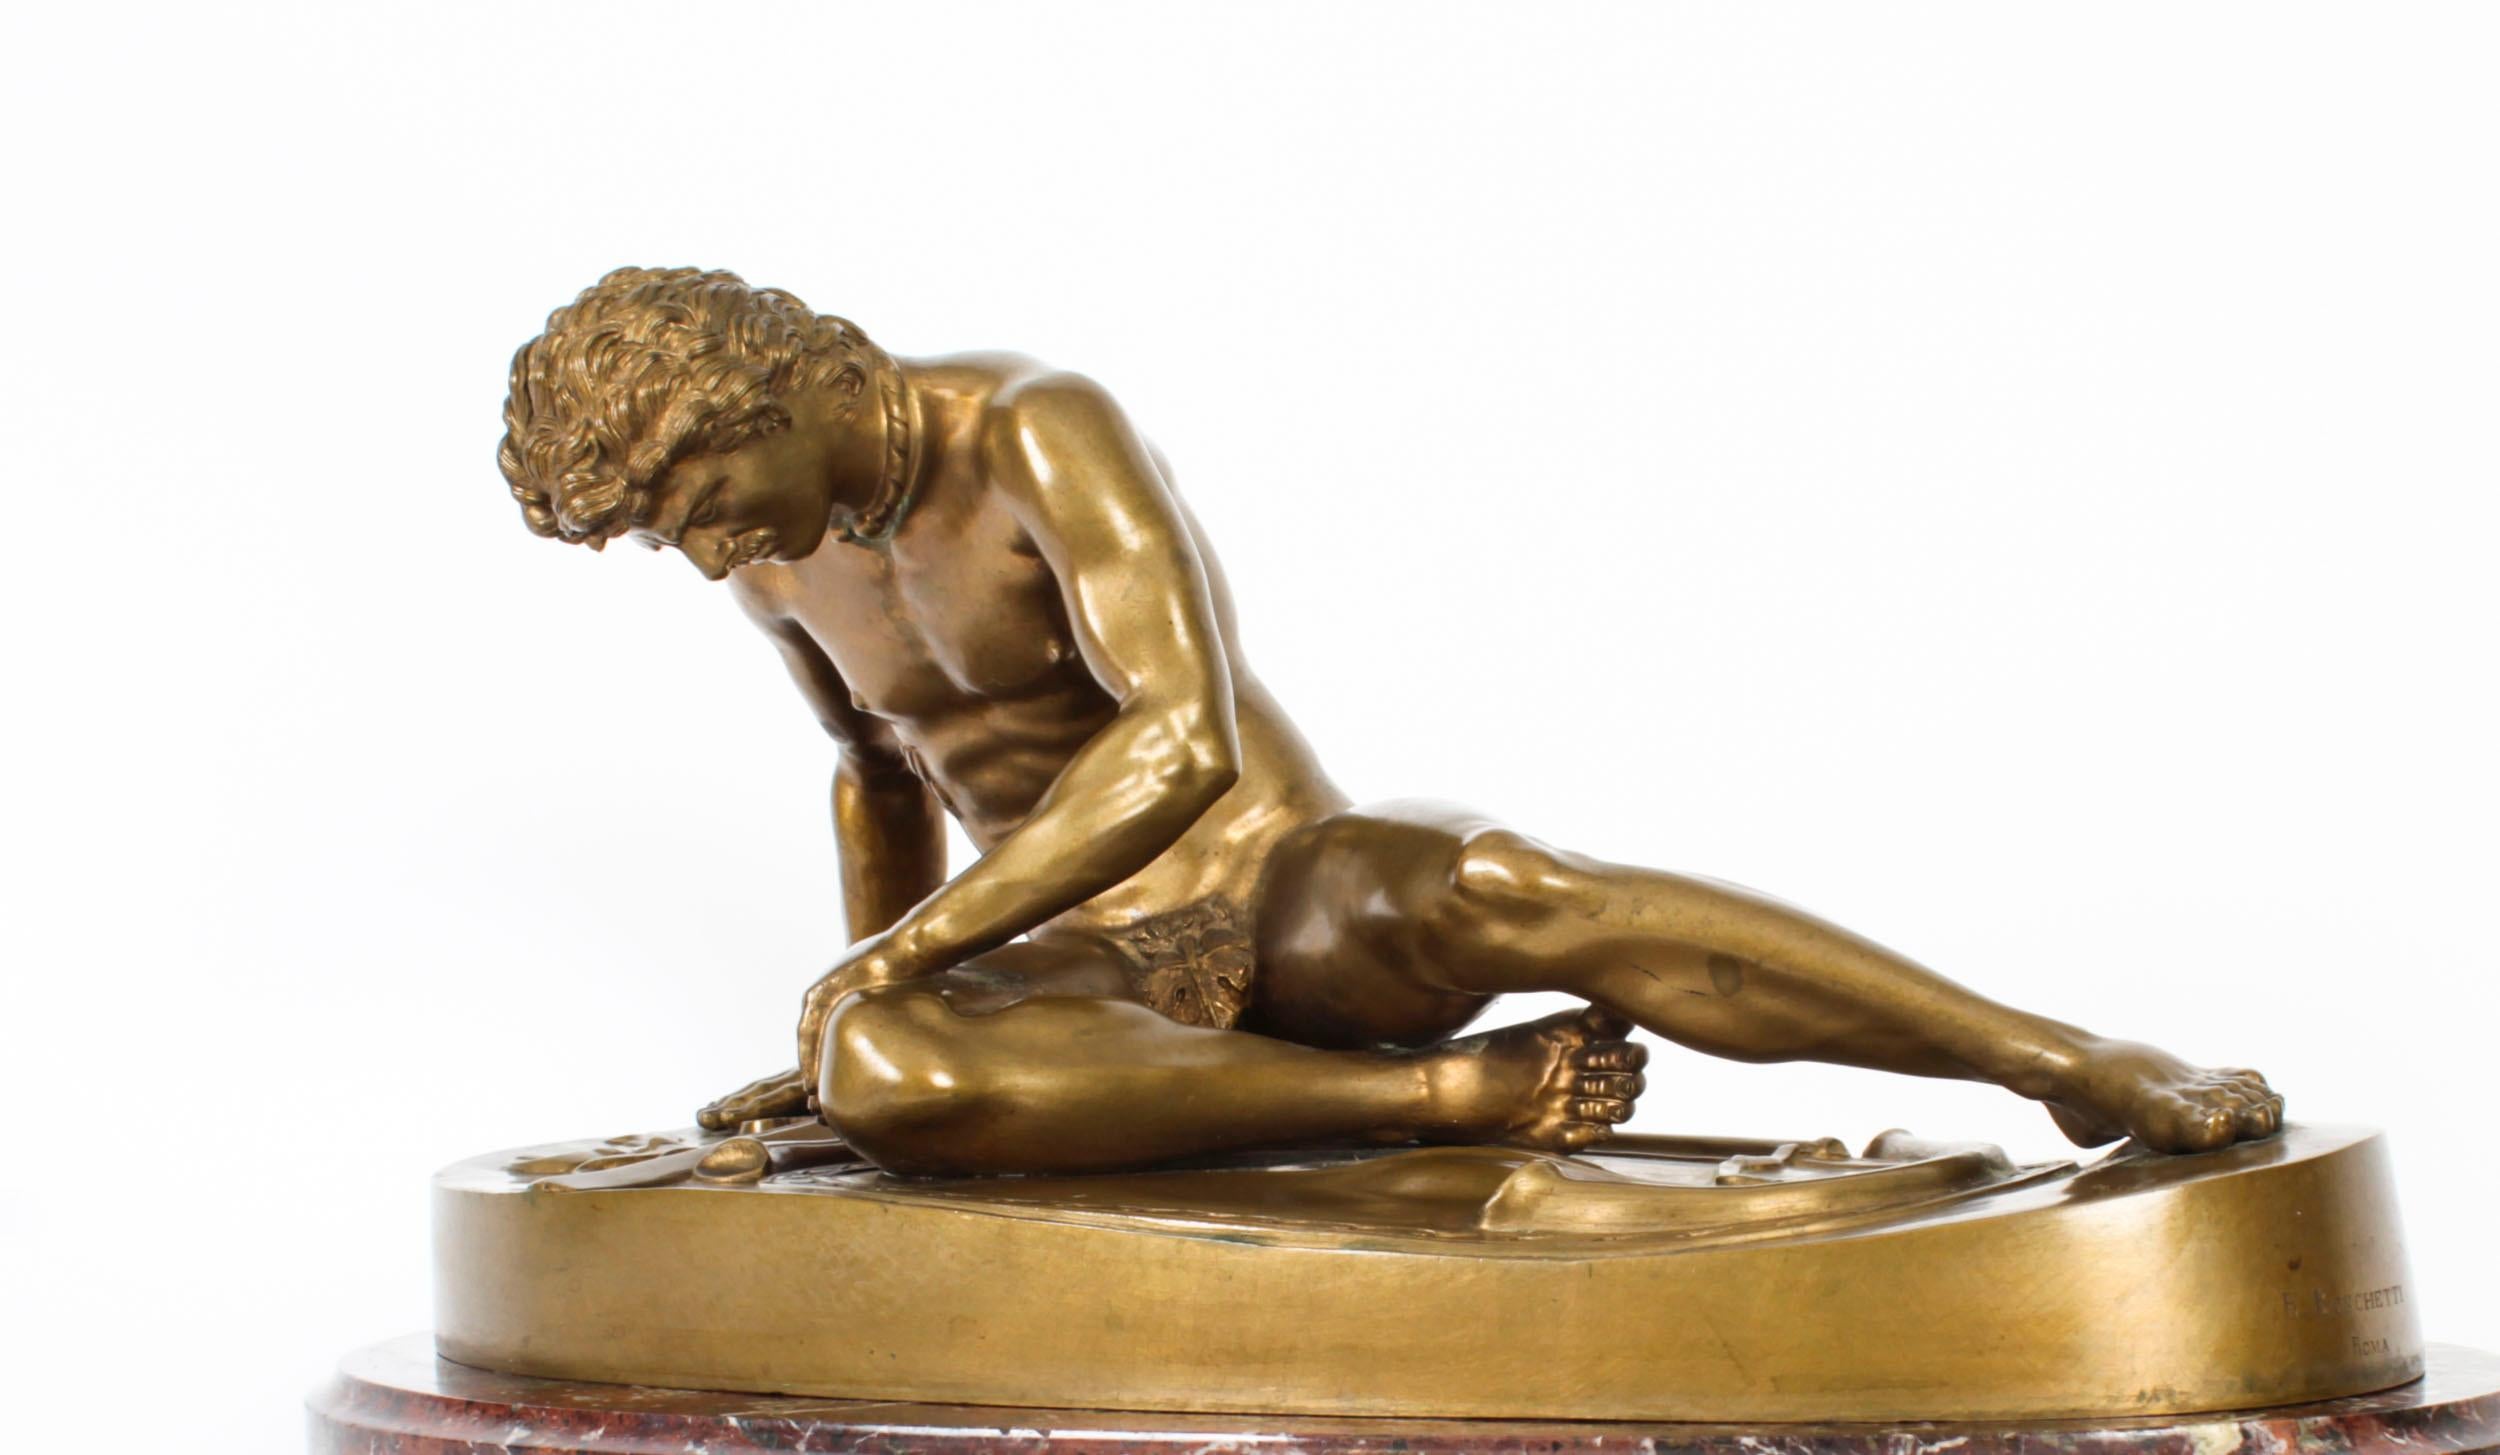 Mid-19th Century Antique Bronze Sculpture of the Dying Gaul by B Boschetti Rome, 19th Century For Sale